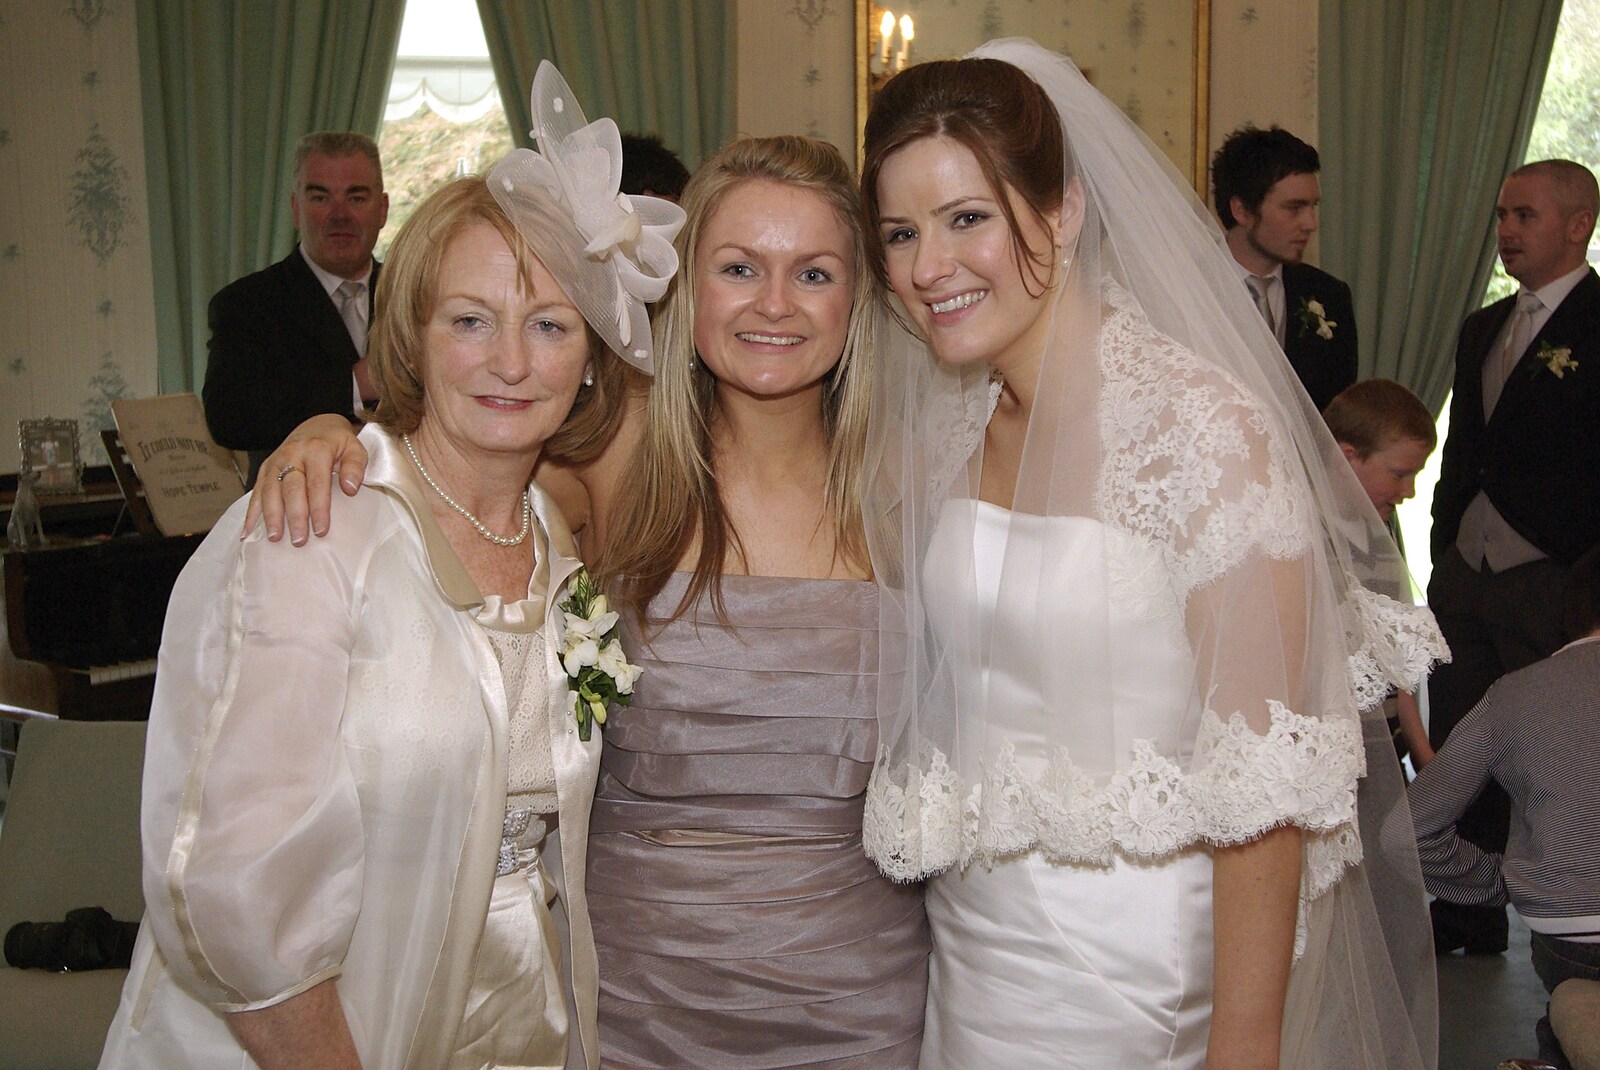 Paul and Jenny's Wedding, Tralee, County Kerry, Ireland - 3rd May 2008: The bride and bridesmaid